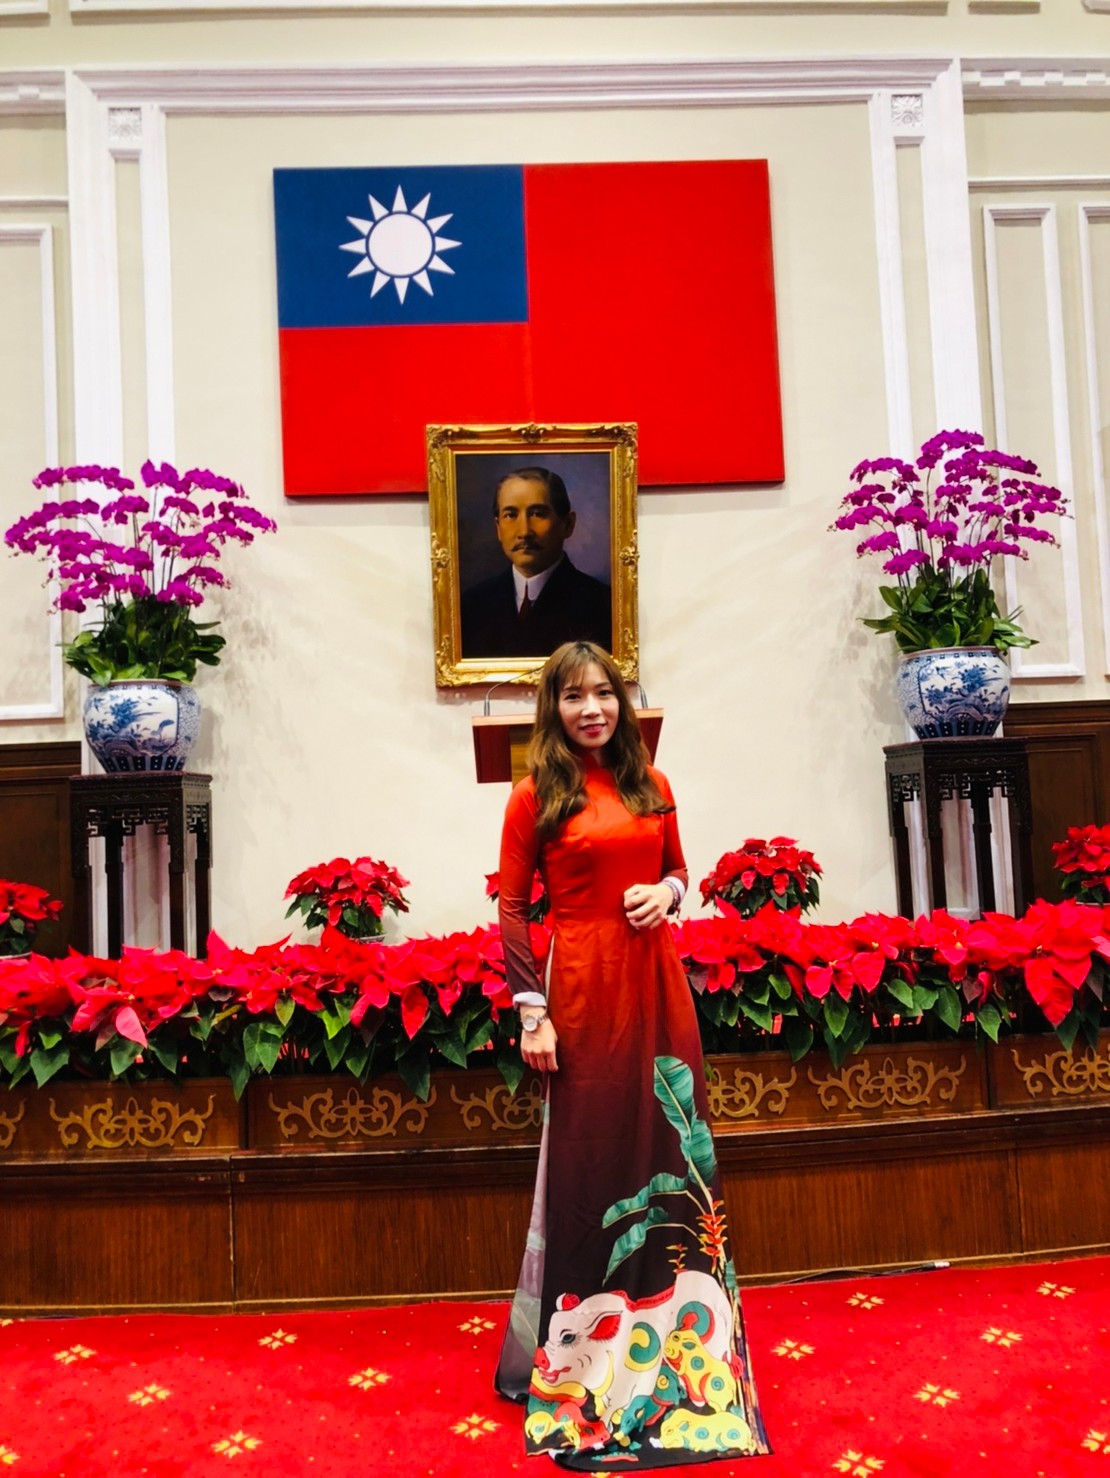 Tran Ngoc Thuy was invited to sing Taiwan’s national anthem at the National Day Ceremony. (Photo / Provided by Tran Ngoc Thuy)